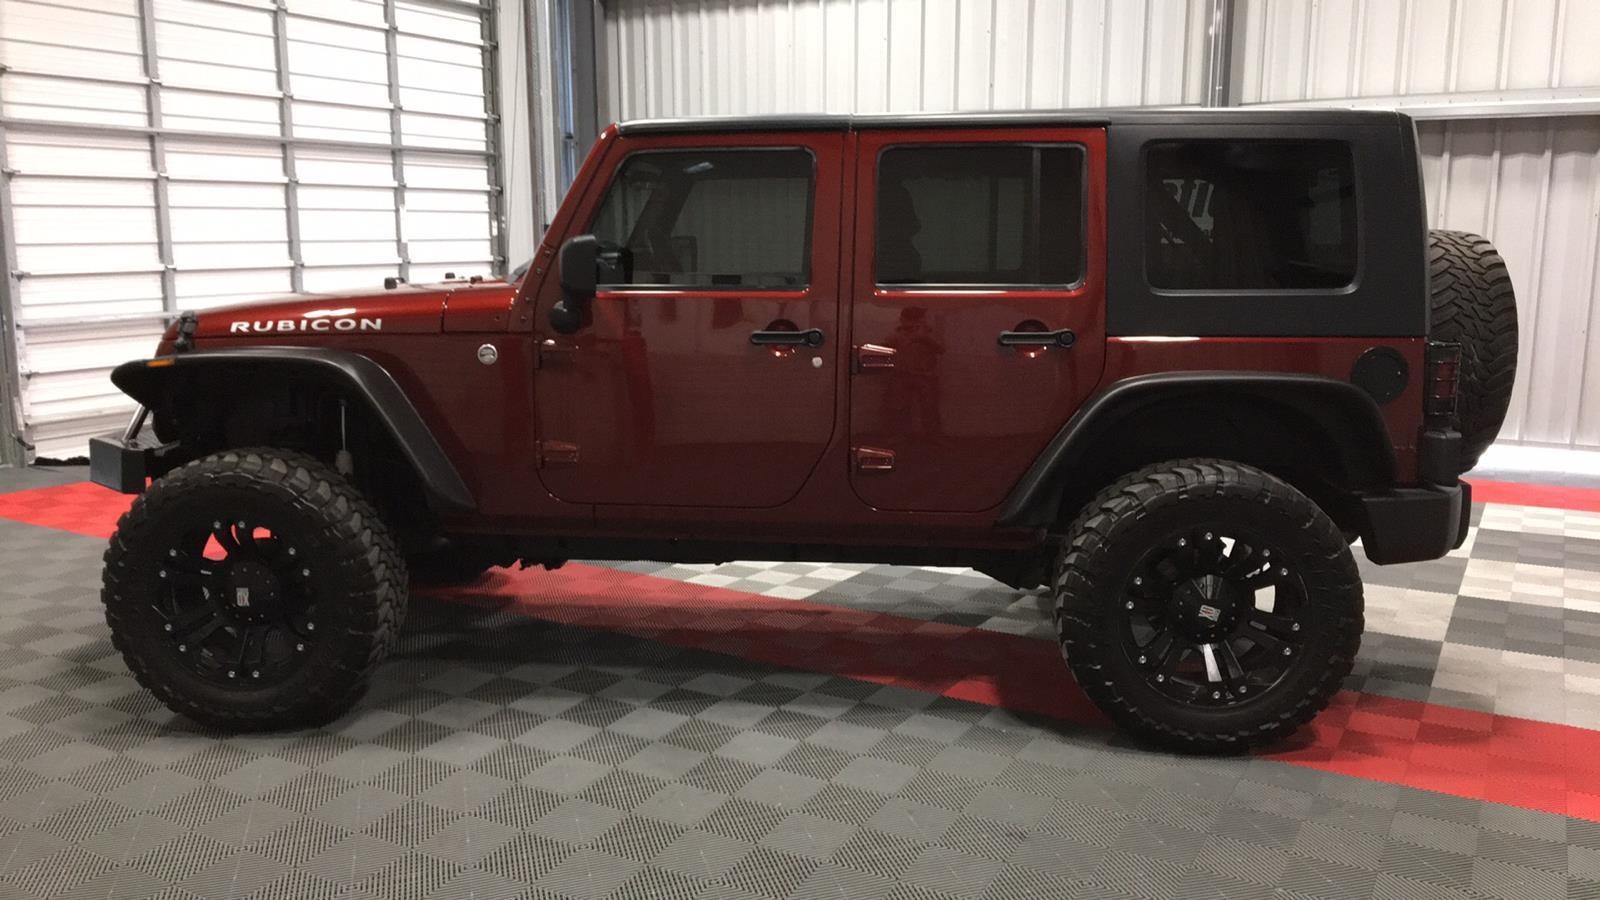 2007 Jeep Wrangler Unlimited Rubicon | Musser Bros. Inc.